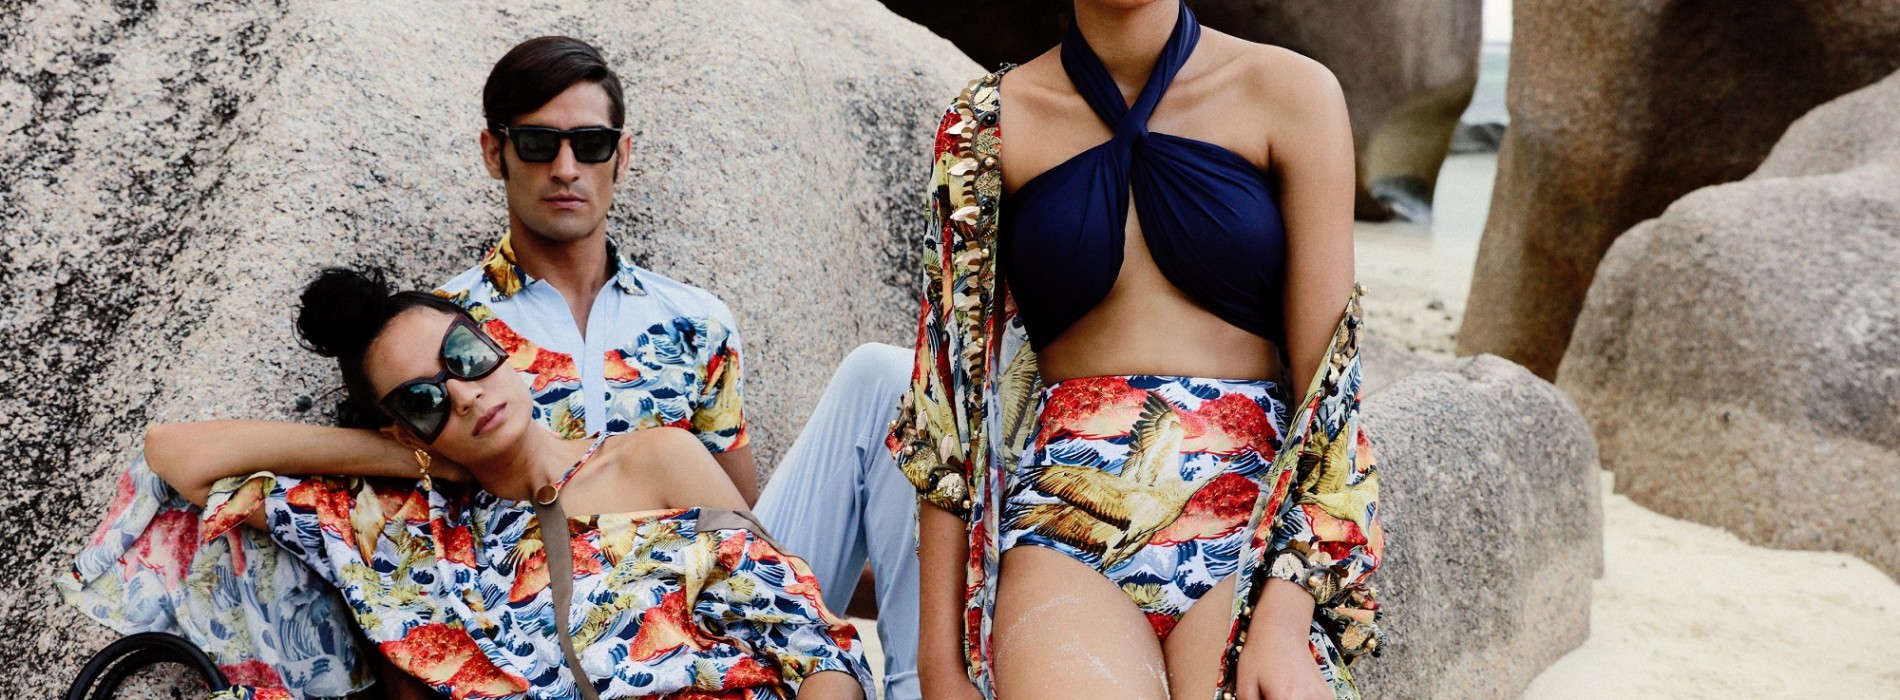 Designer duo Shivan and Narresh shoot their new Seychelles inspired collection in the beautiful islands